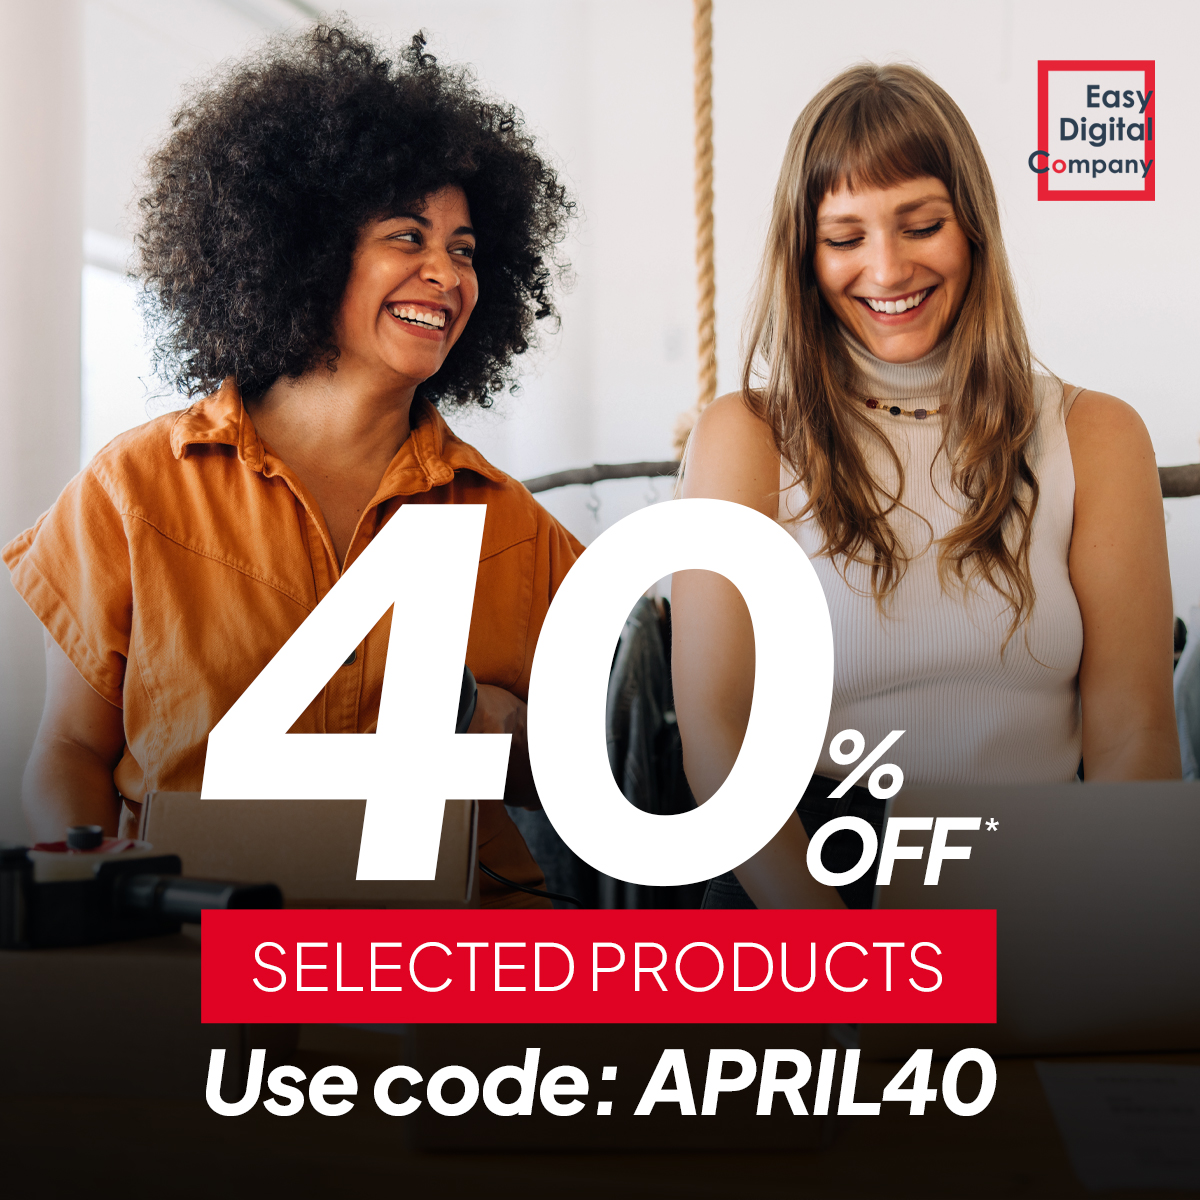 Start your own #limitedcompany with ease during our April Madness Sale! 💥

Enjoy a massive 40%* discount on selected products. Sale ends April 30th 🏷 Use code APRIL40 at checkout.

Click here: lnkd.in/eBGCV-a7

#FlashSale #CompanyFormation #BusinessOwner #Entrepreneurs